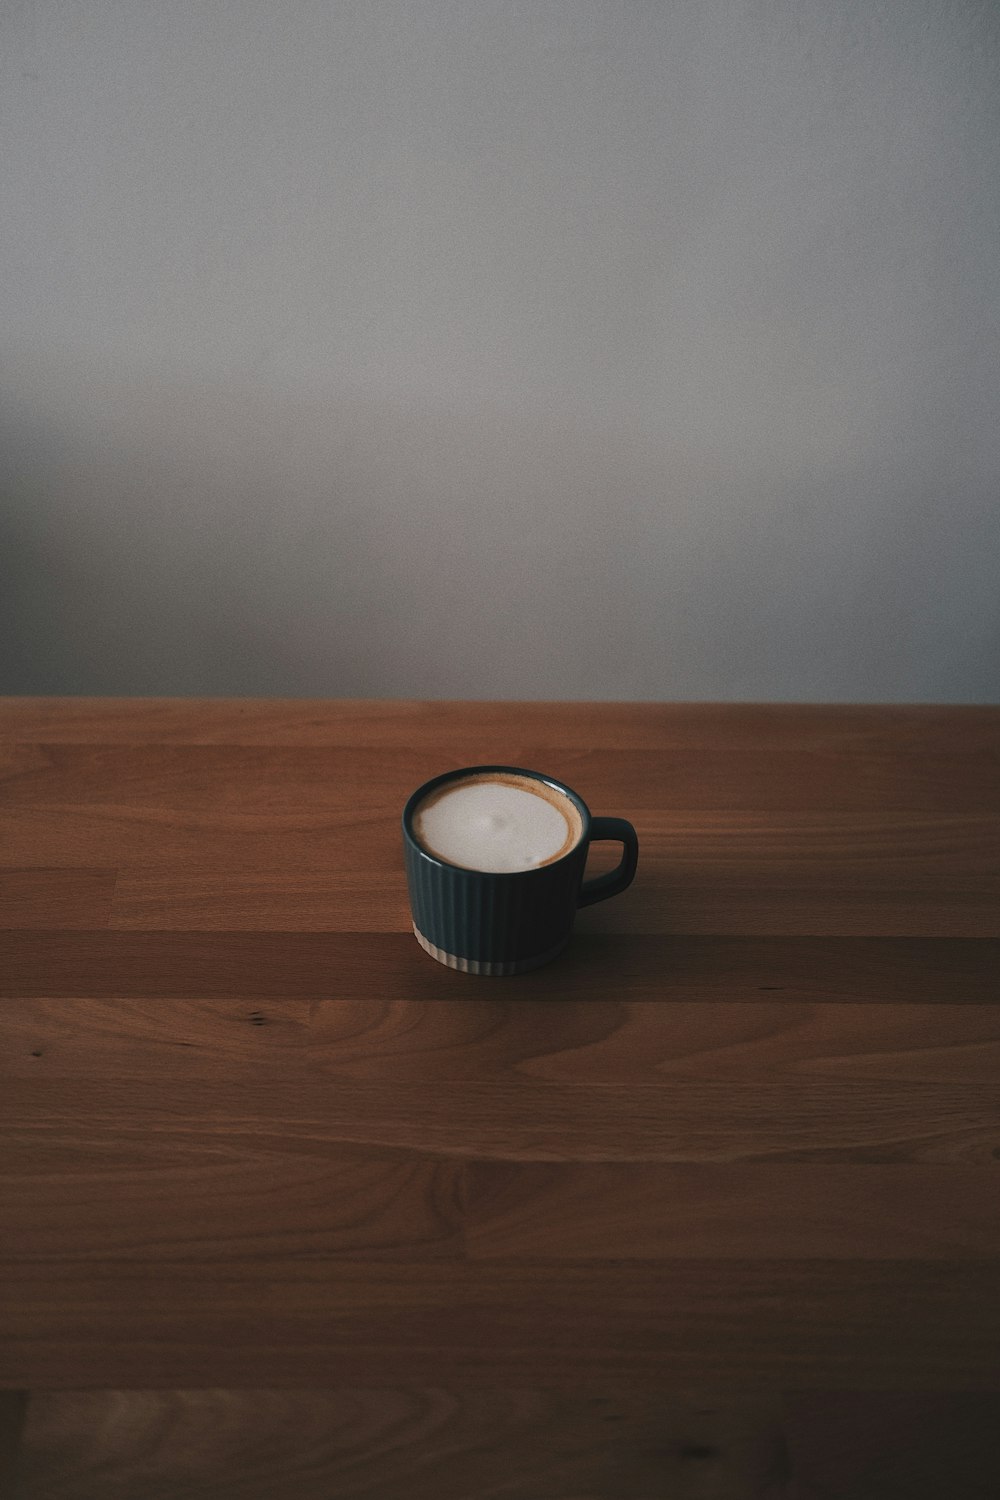 a cup sitting on top of a wooden table